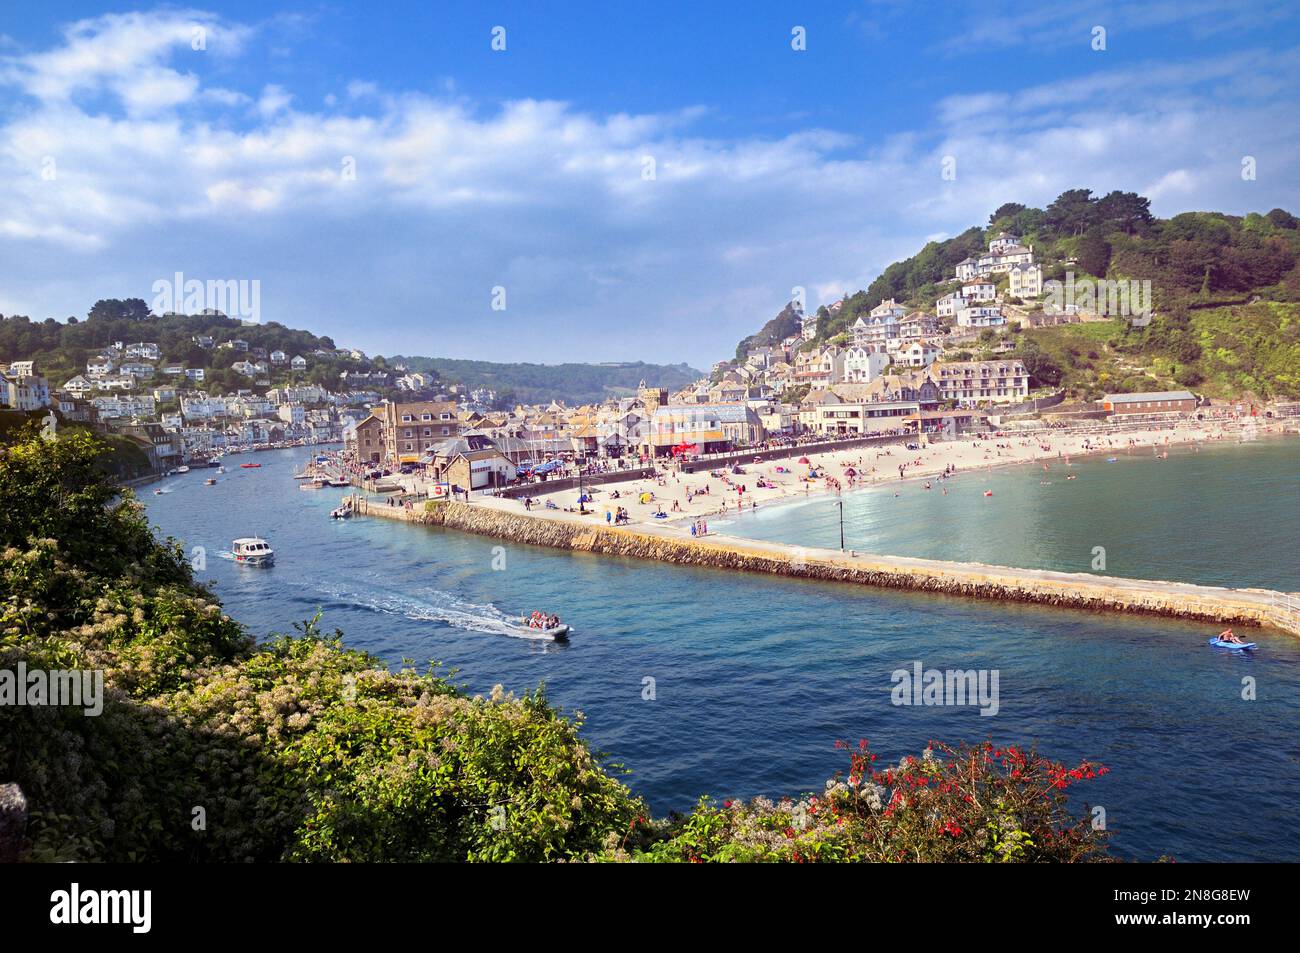 An elevated view of boats on the River Looe with holidaymakers enjoying summer weather at the seaside on East Looe beach, Looe, Cornwall, England, UK Stock Photo